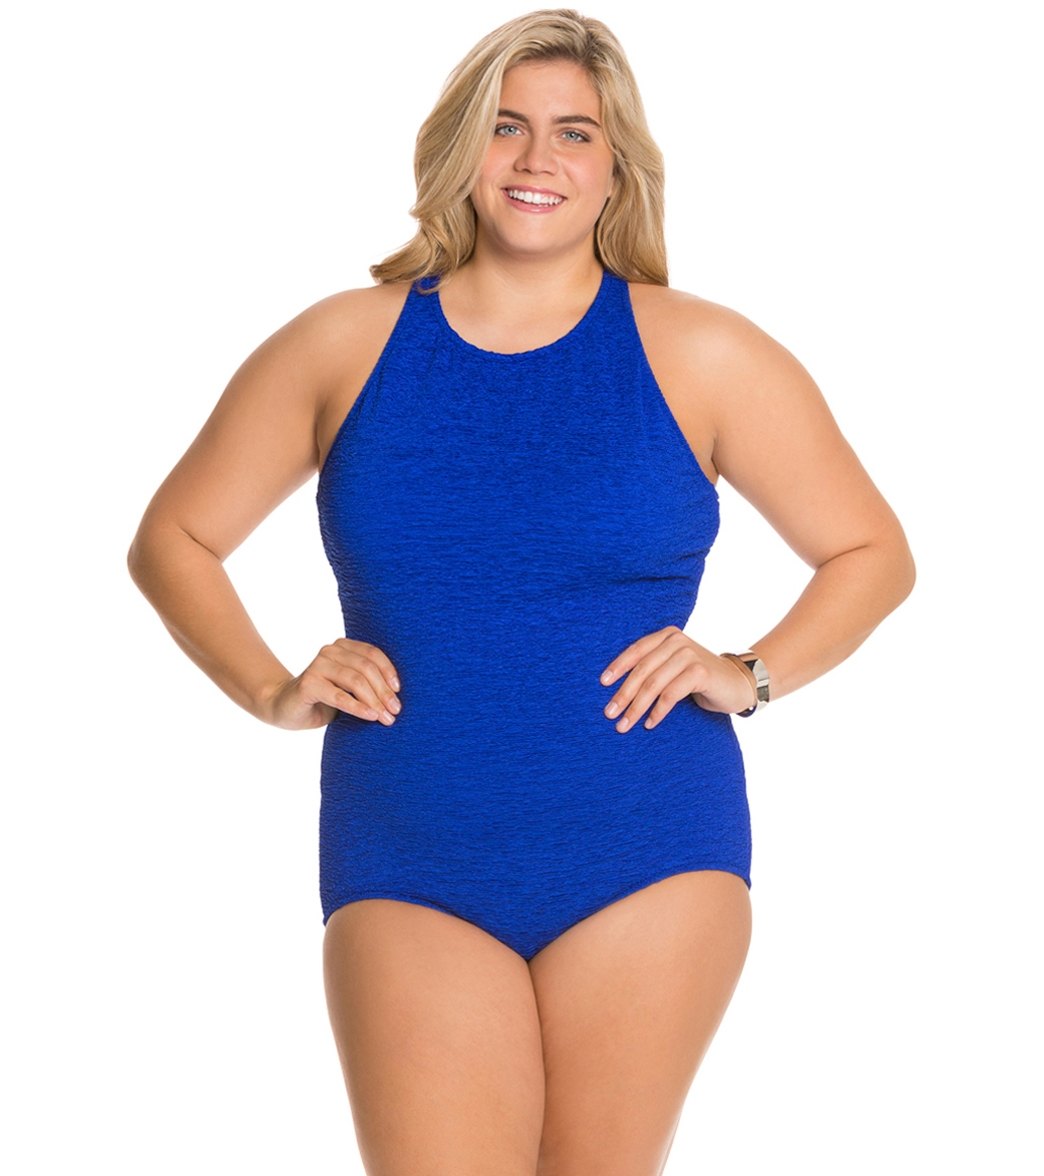 Chlorine Resistant Krinkle Textured Solid Empire Mio Long Torso One Piece, One Piece